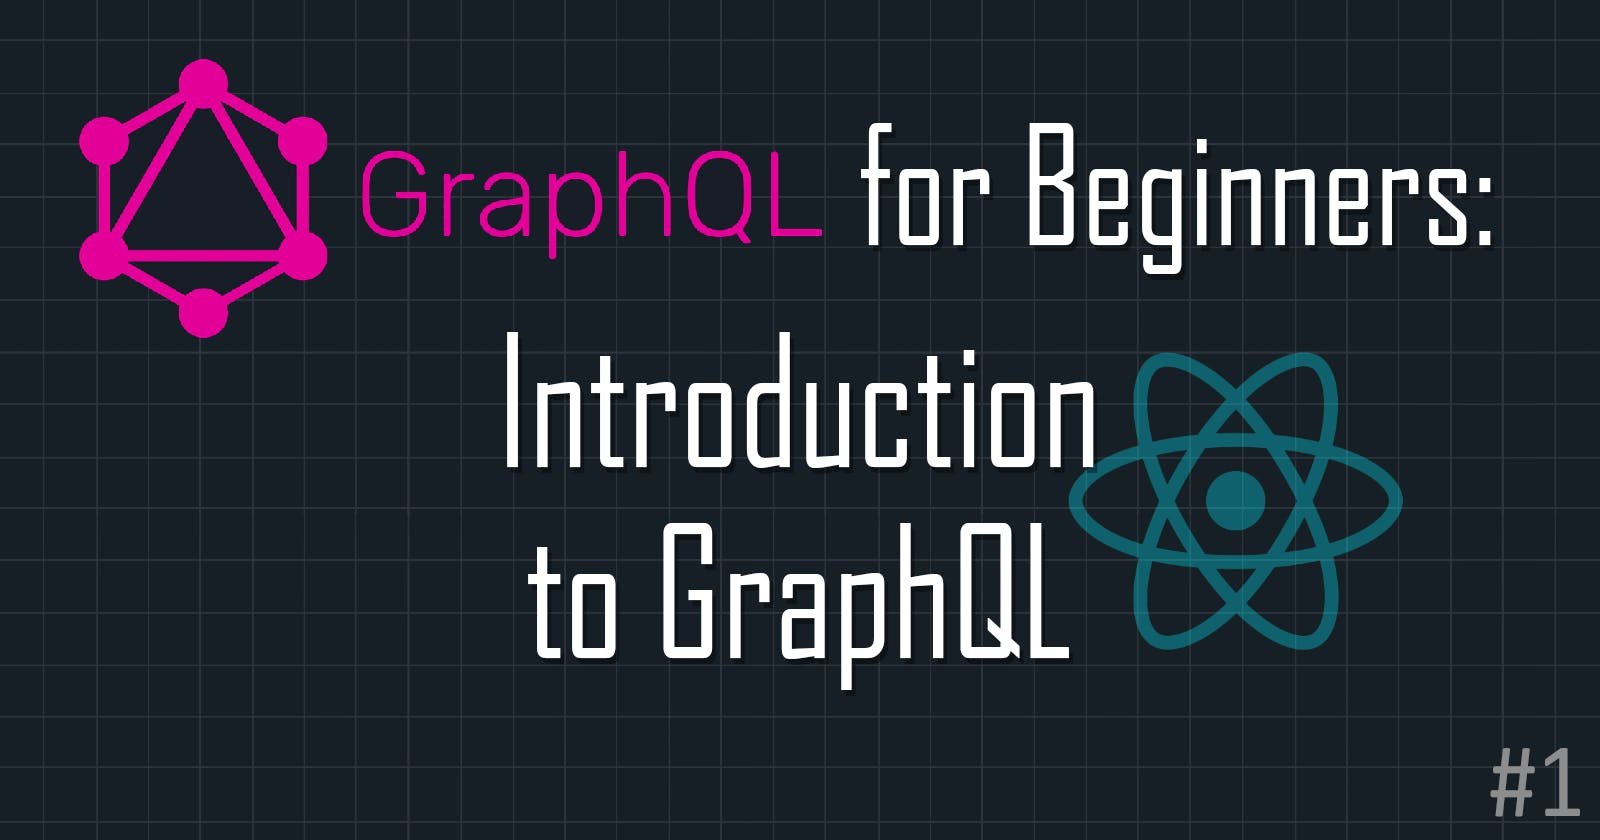 GraphQL for Beginners: Introduction